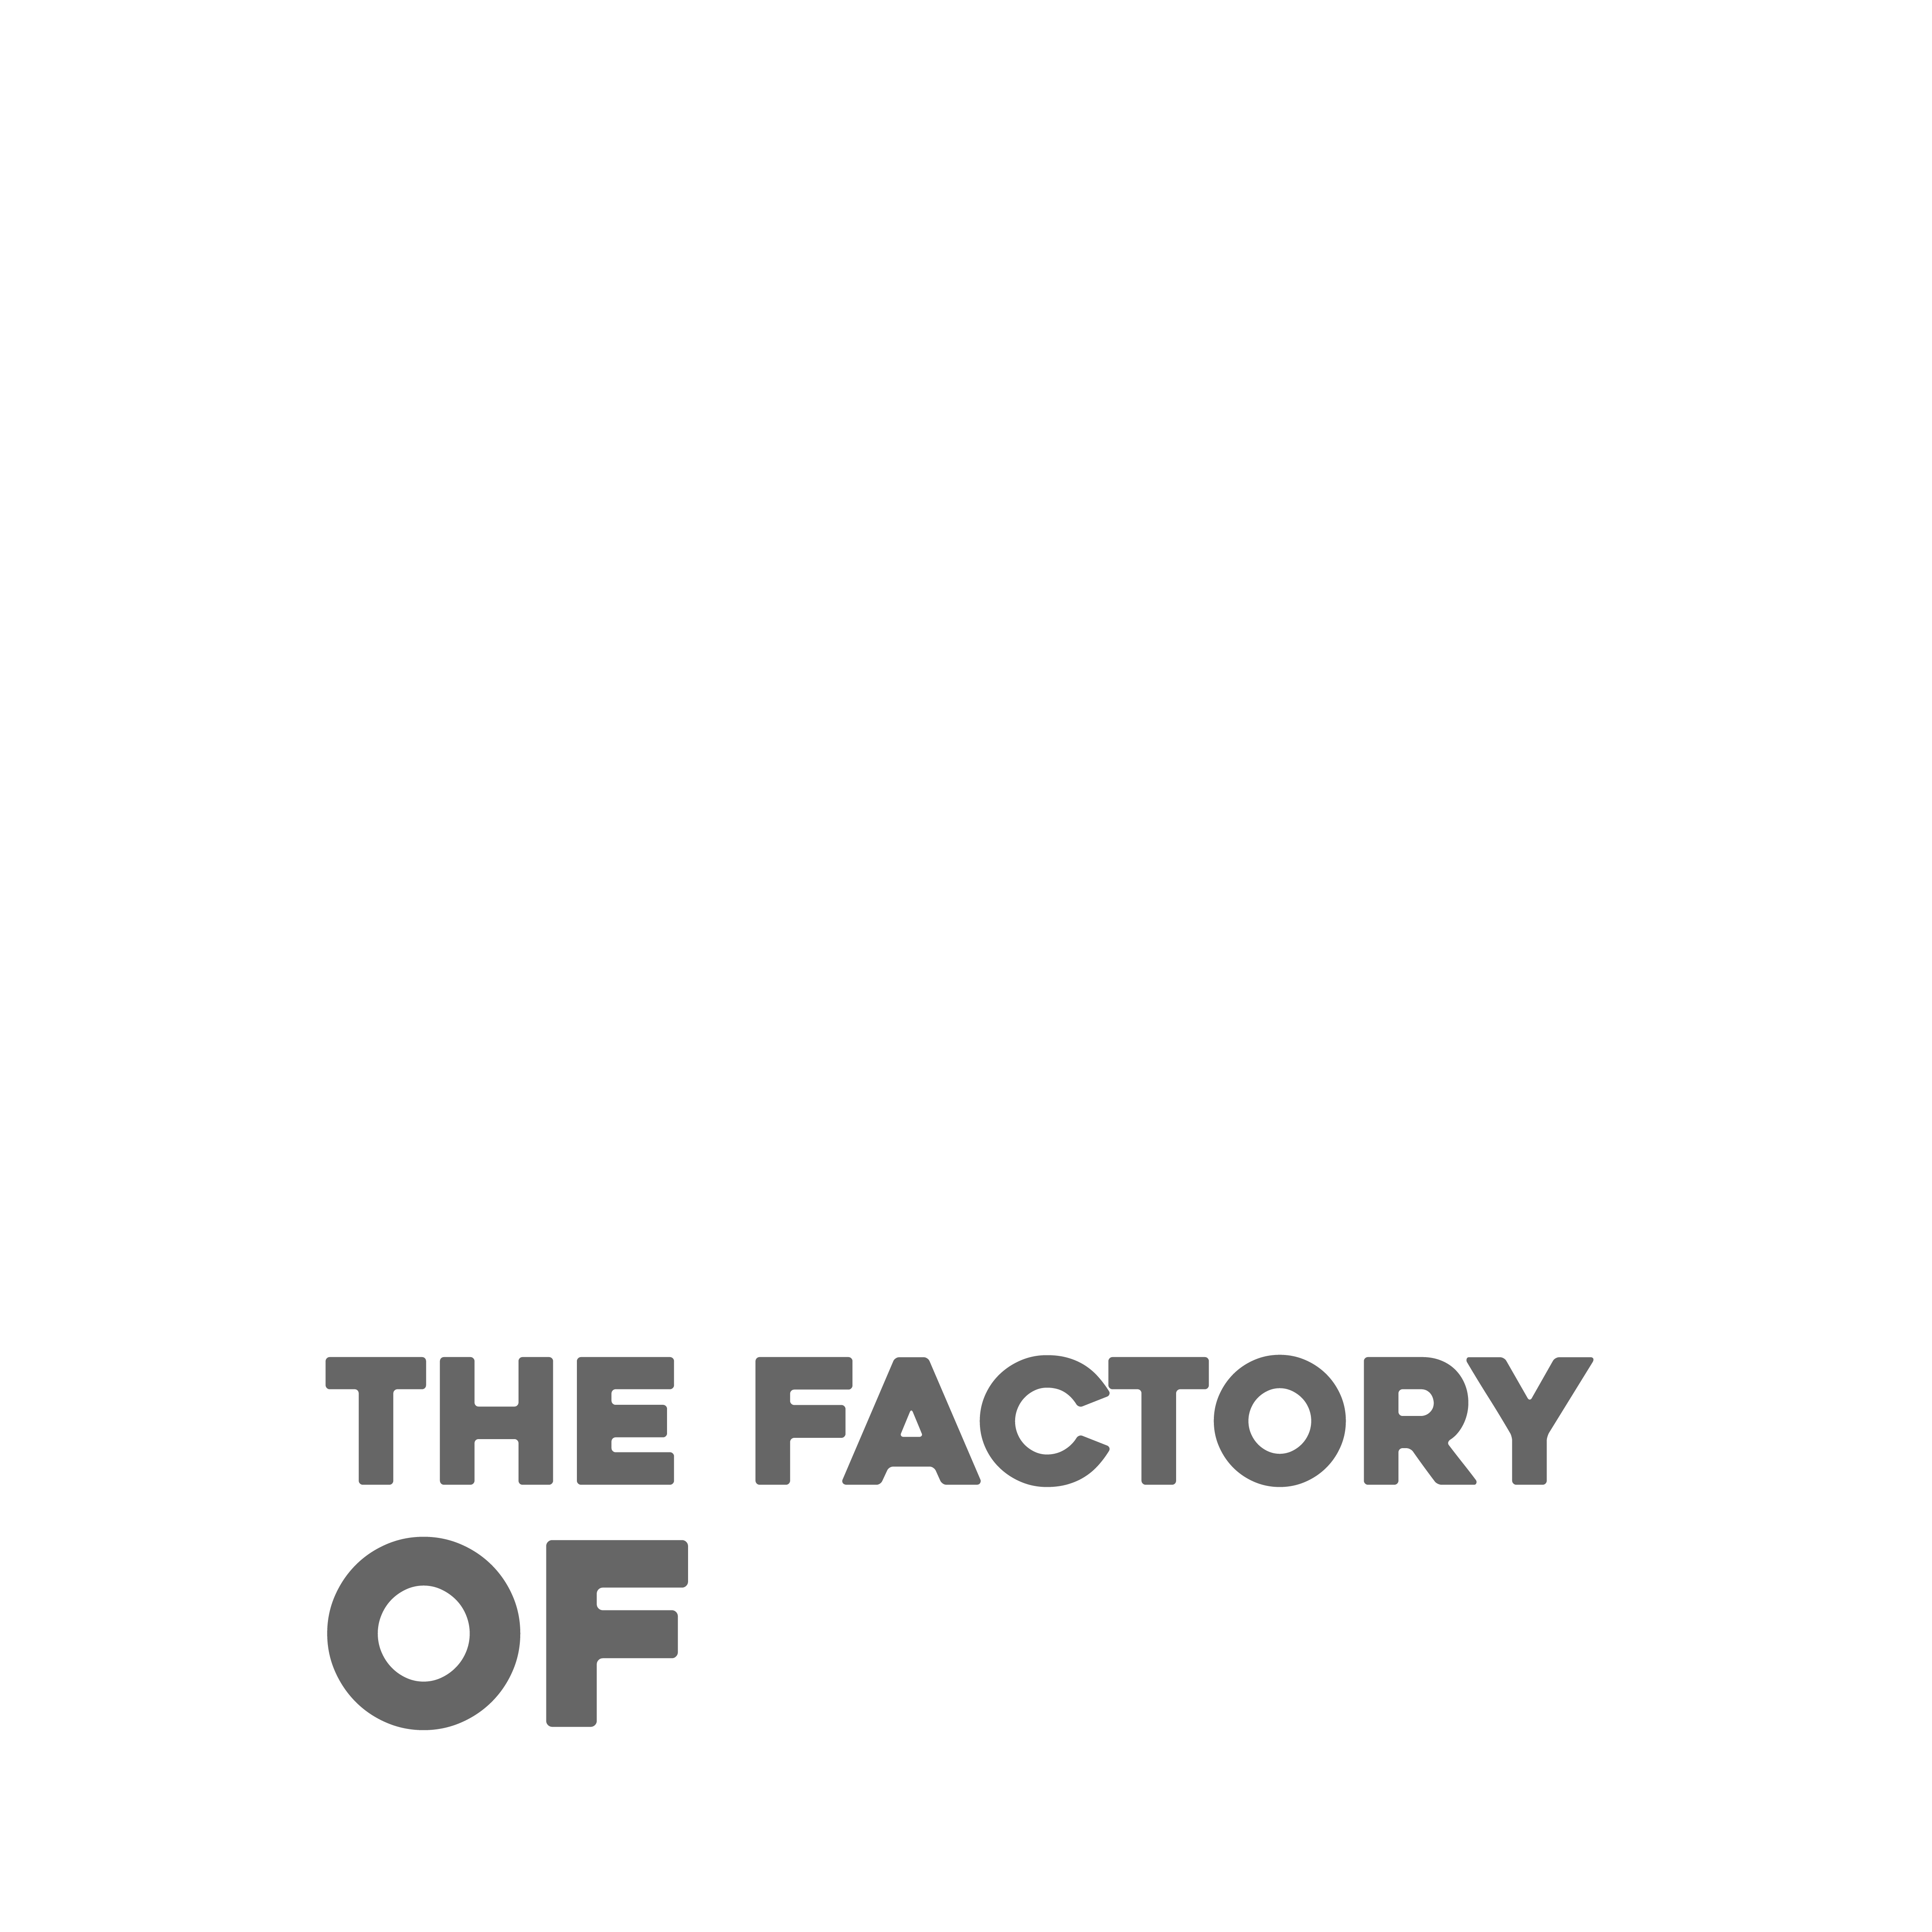 The Factory of Ideas